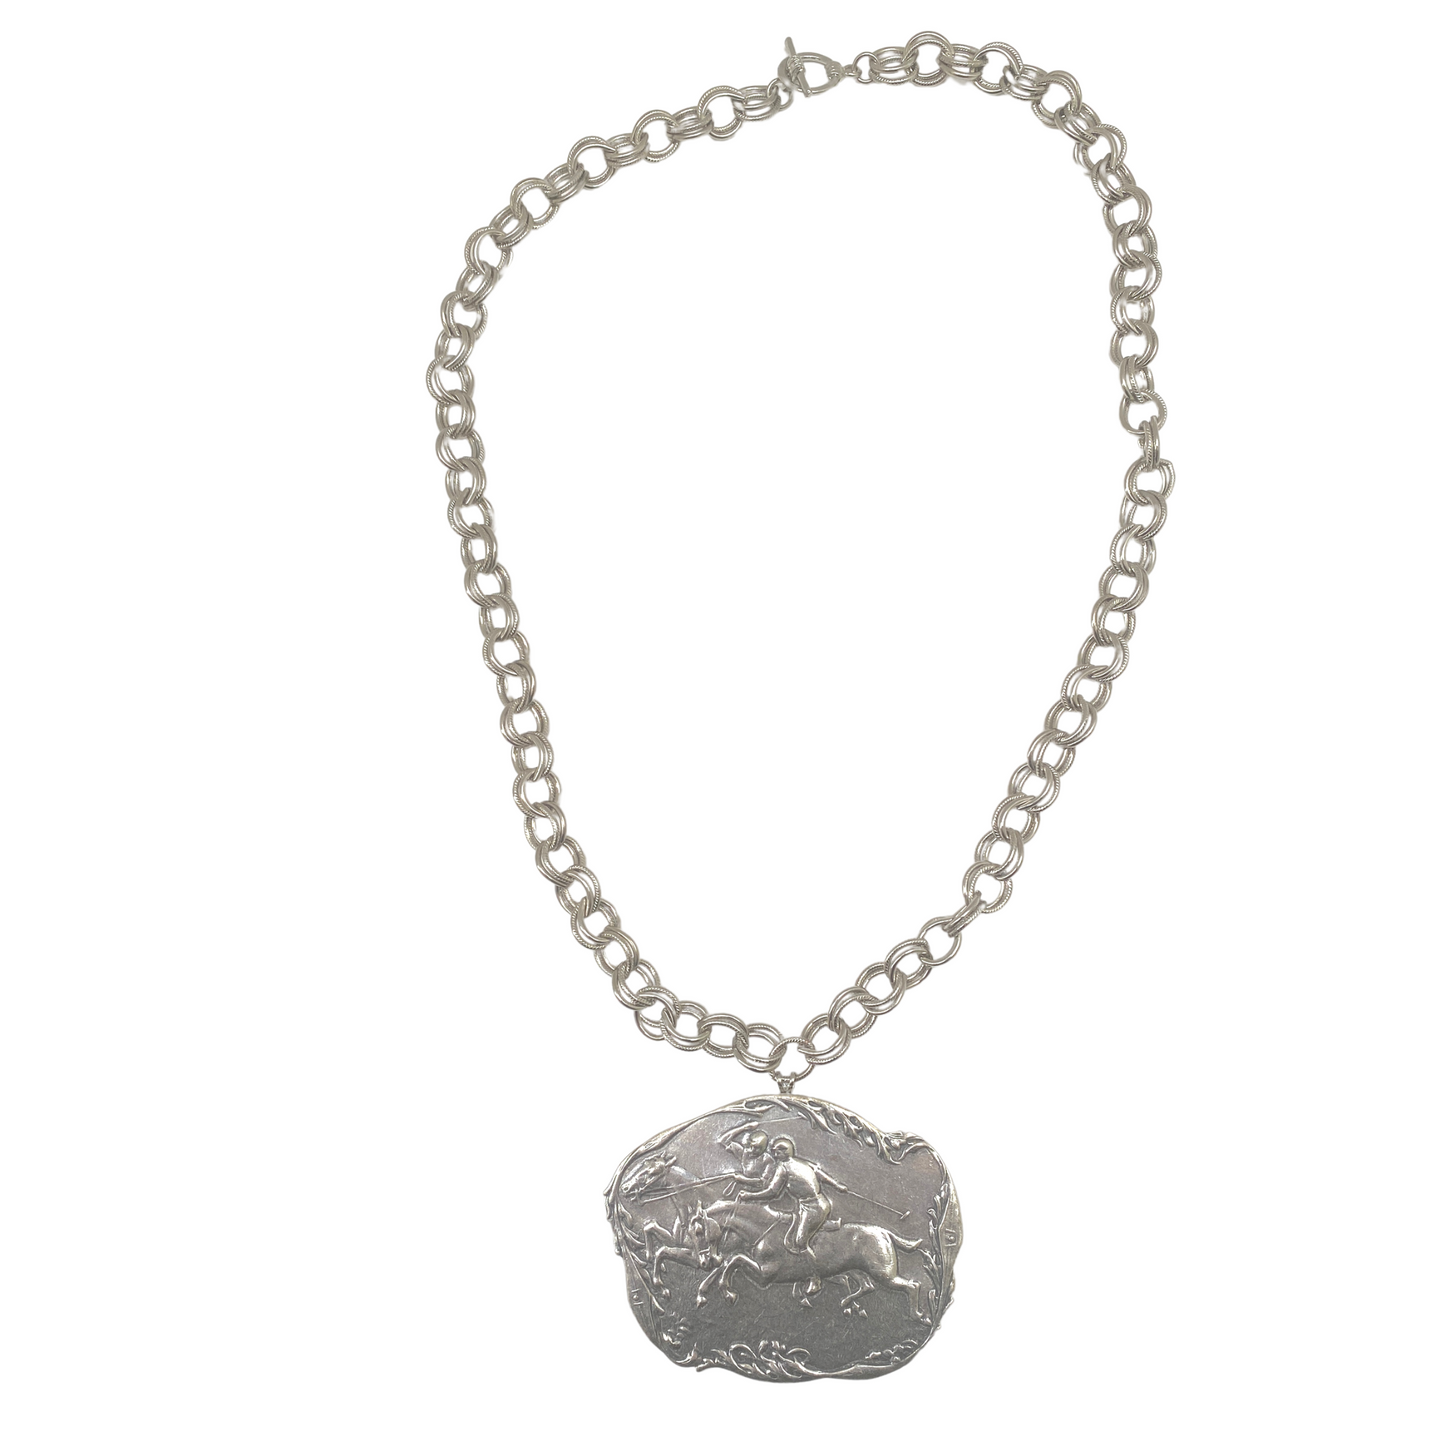 Silver Polo Necklace, Jewelry for Polo Equestrian